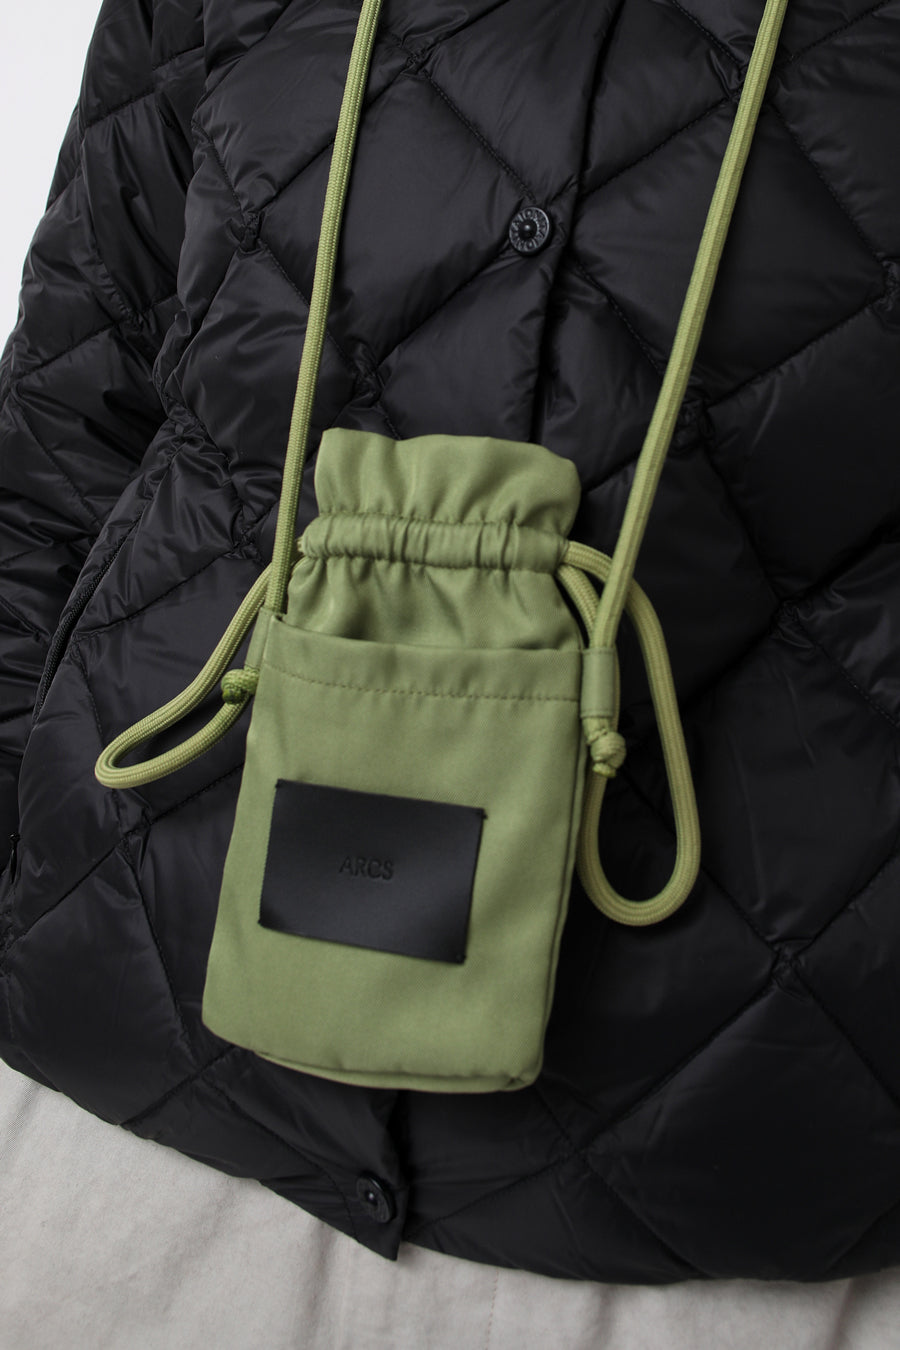 ARCS Minute Neck Pouch in Moss